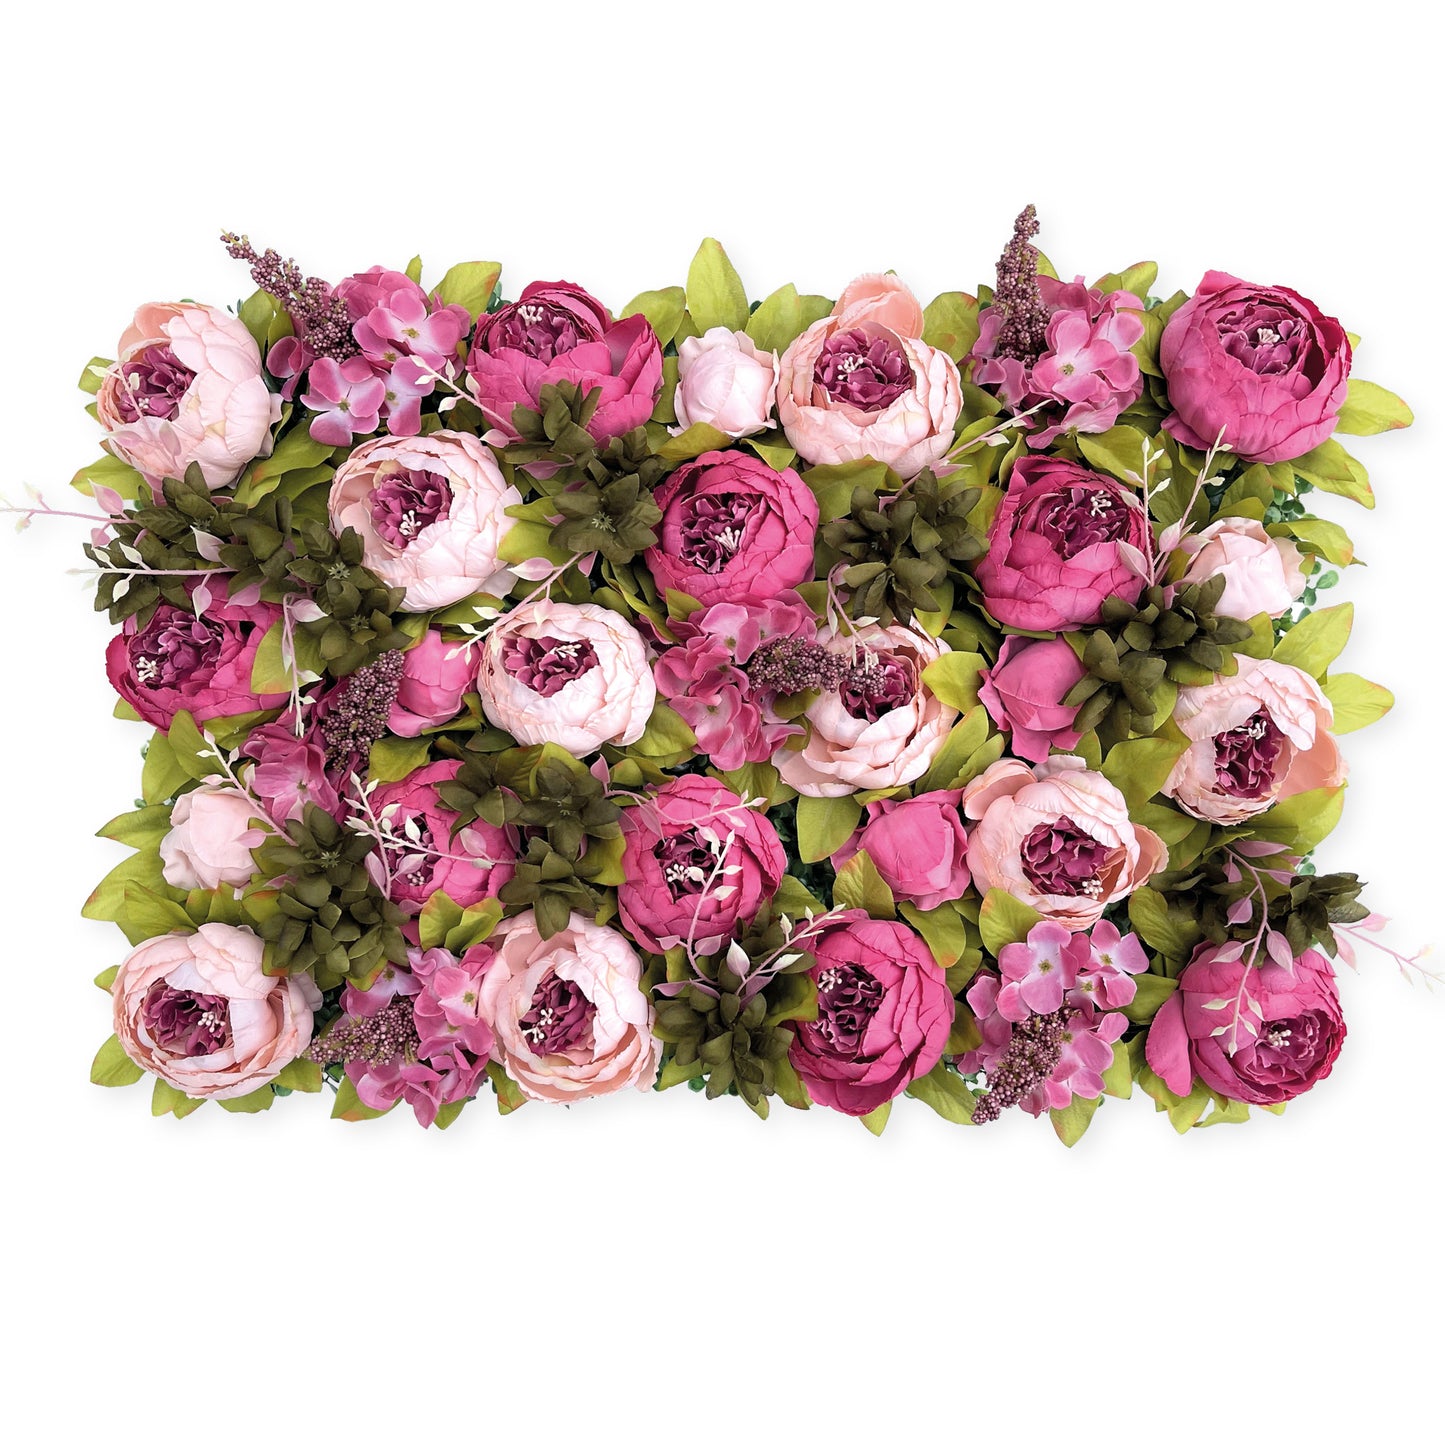 Flower panel "PINK BLUEBERRY" made of Realtouch artificial plants